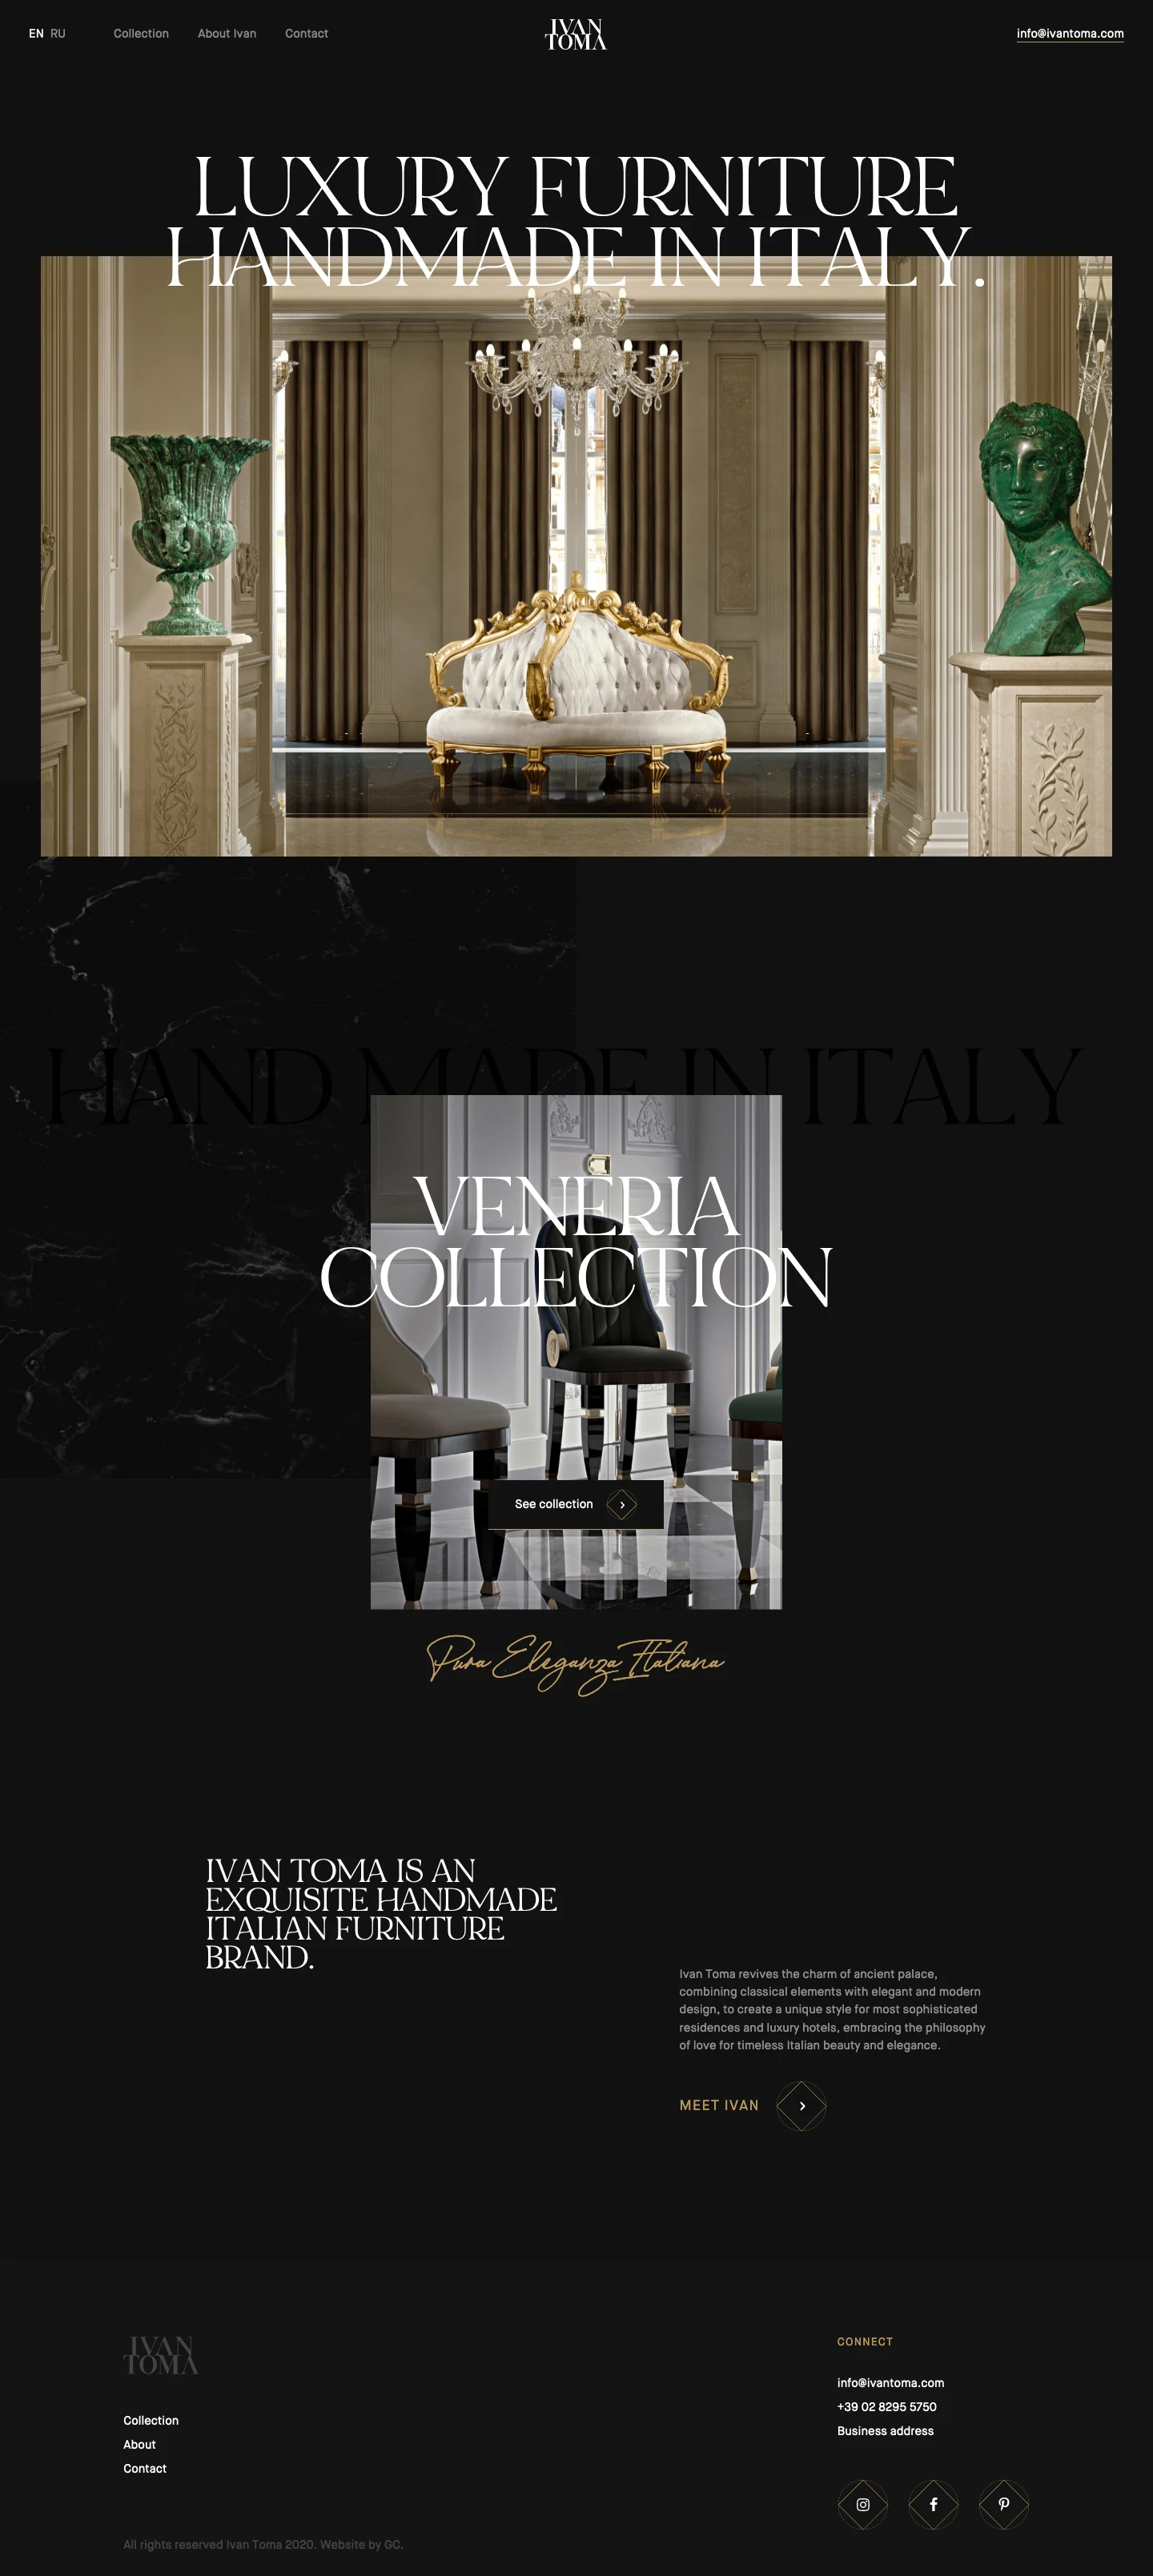 Ivan Toma Landing Page Example: Ivan Toma revives the charm of ancient palaces, combining classical elements with elegant and modern design, to create a unique style for the most sophisticated residences and luxury hotels, embracing the philosophy of love for timeless Italian beauty and elegance.